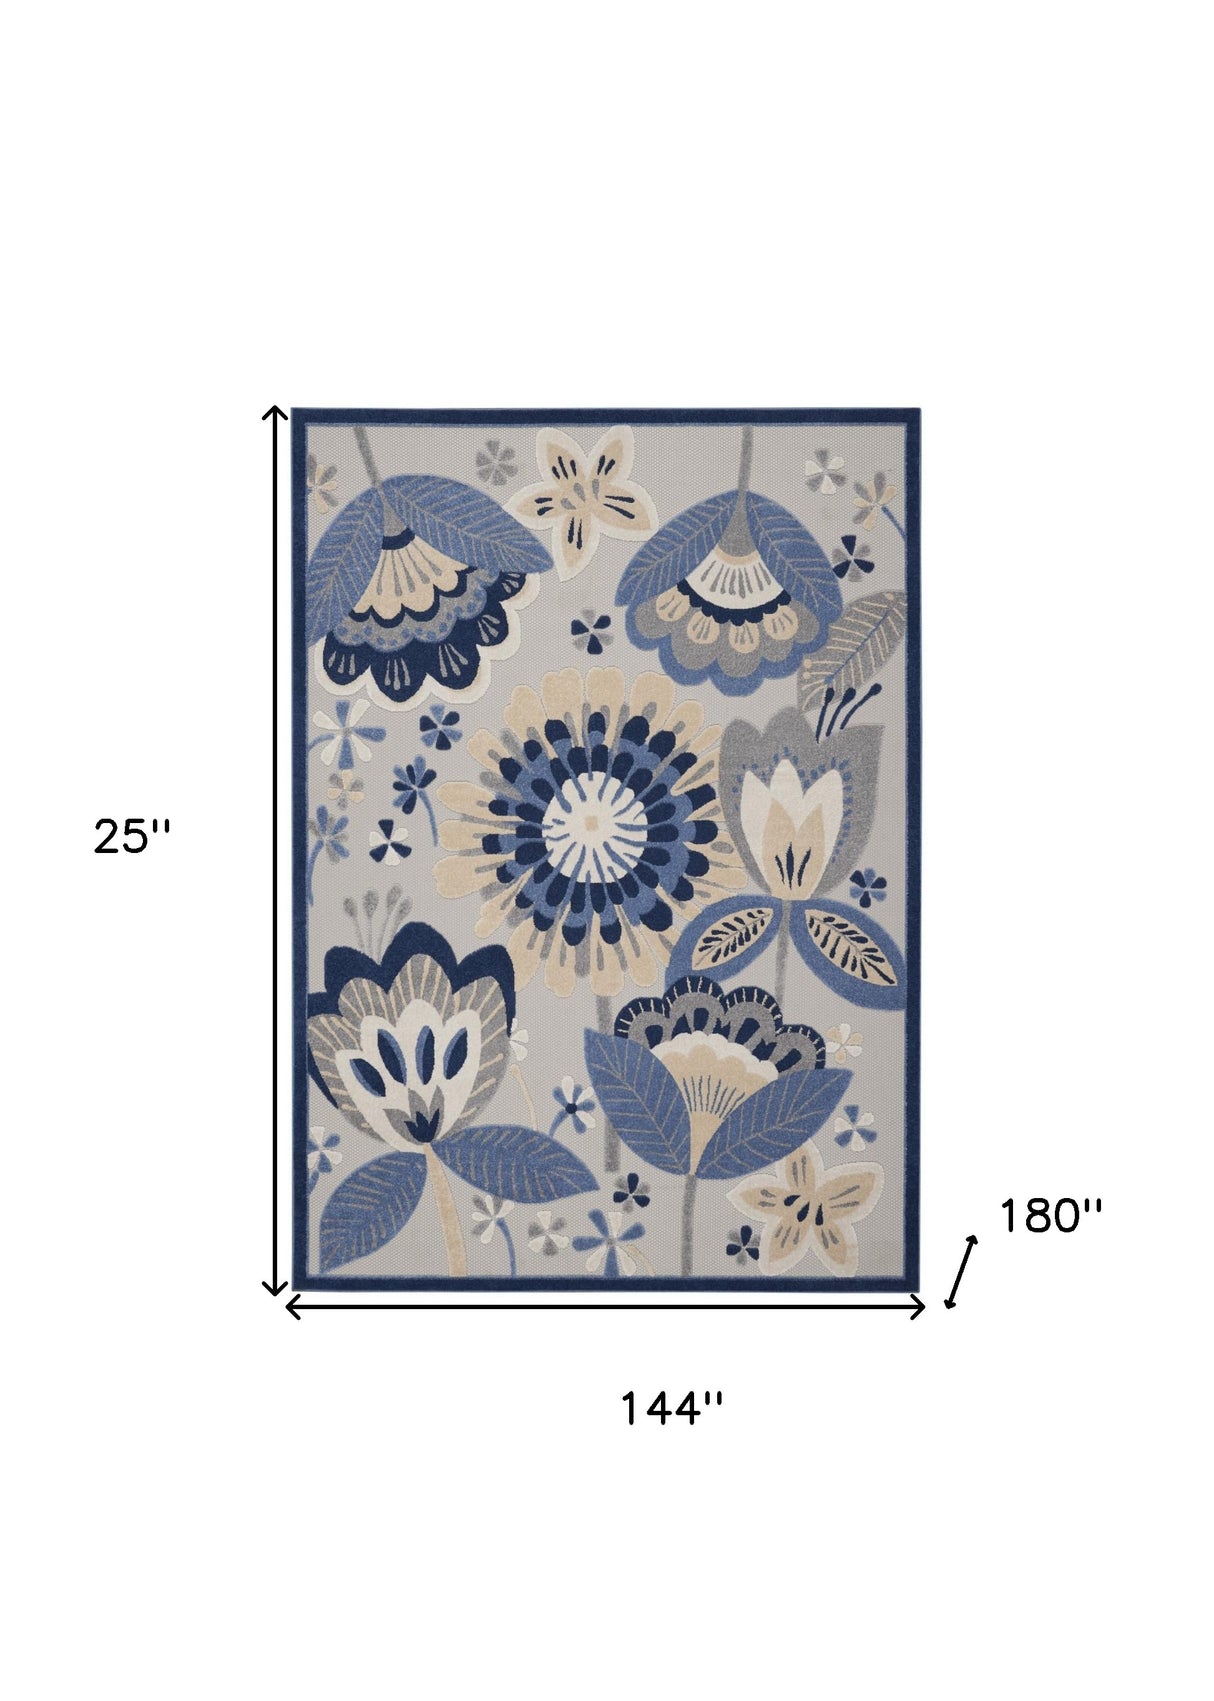 12' X 15' Blue And Grey Floral Non Skid Indoor Outdoor Area Rug